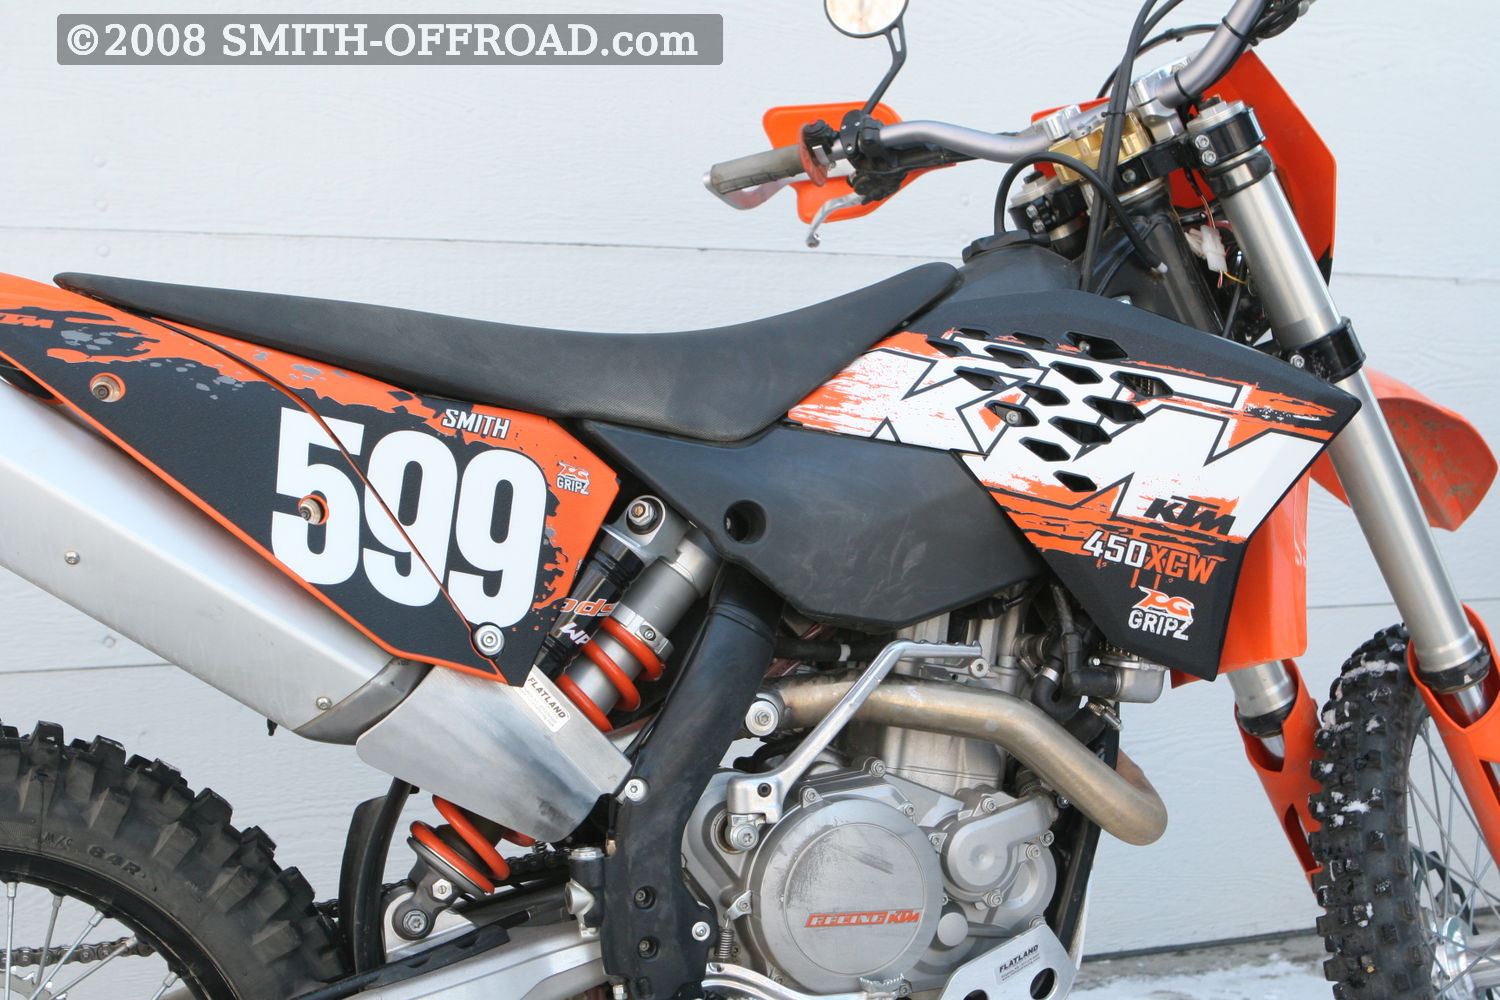 New Graphics Kit from RidePG.com with Preprinted Number Plates
, photo 